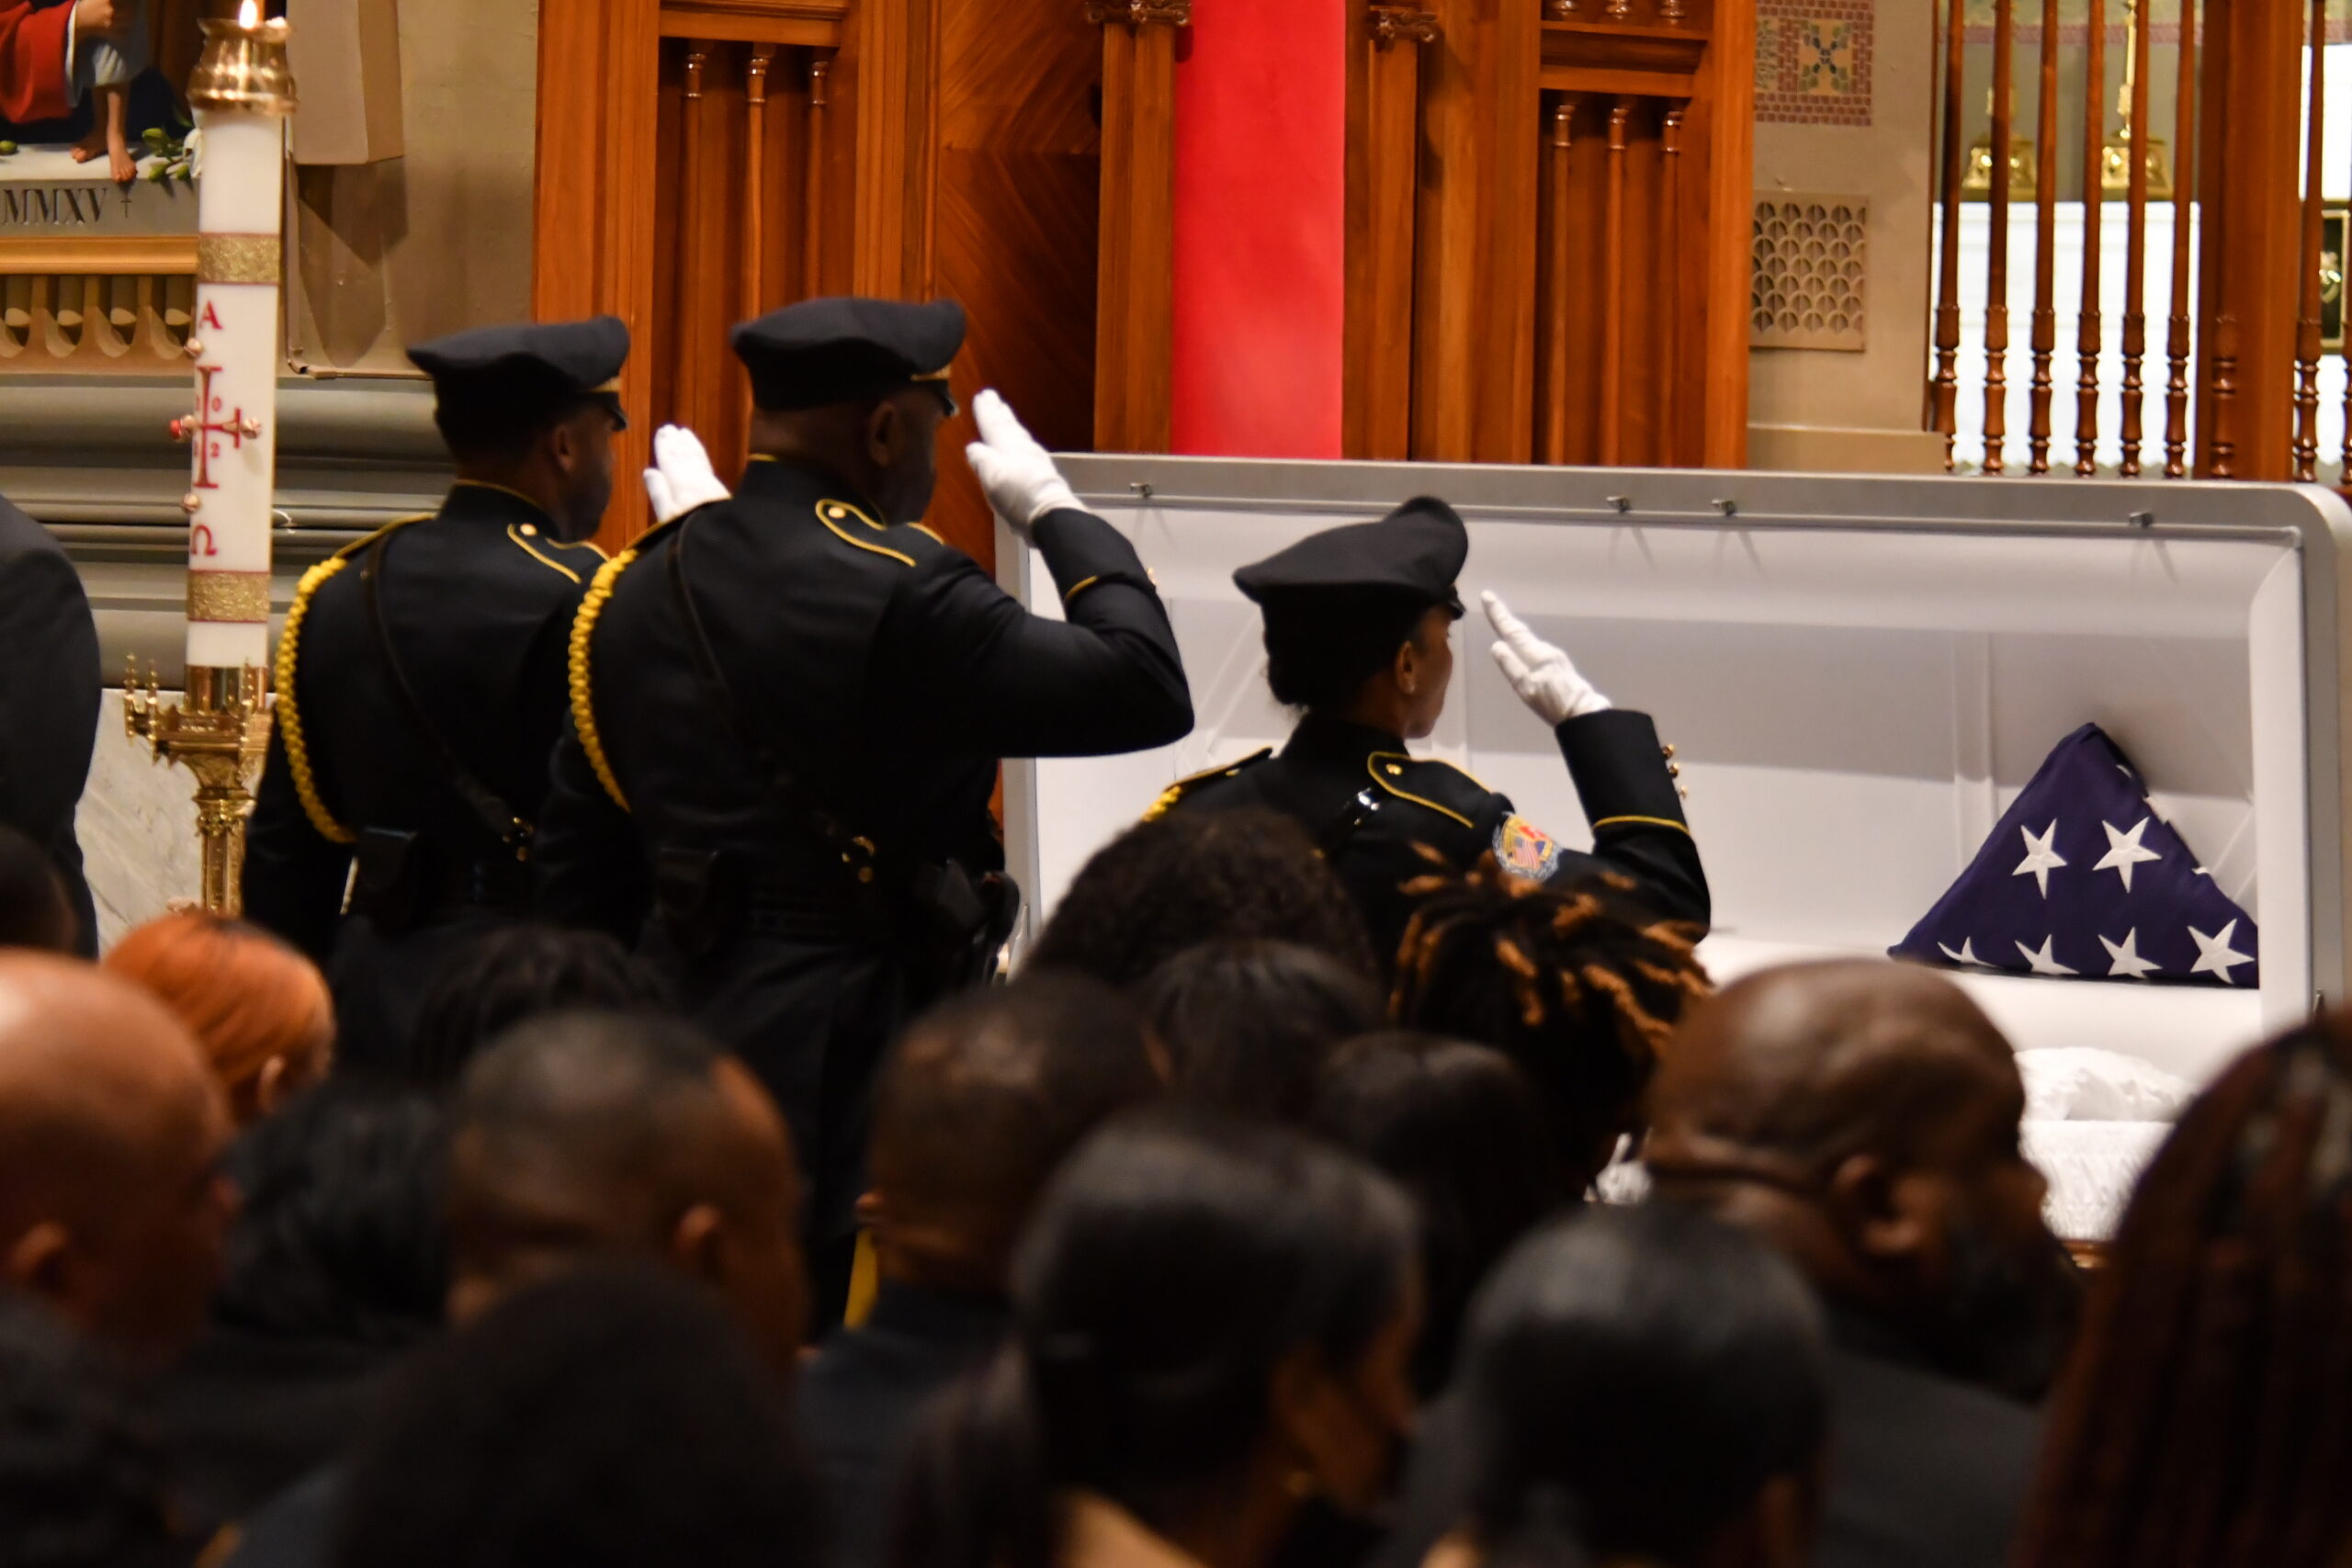 Law enforcement officers salute the casket during Friday's funeral services for slain Temple University police officer Christopher Fitzgerald, who was killed in the line of duty Feb. 18. He was 31. Photo credit: Abdul R. Sulayman, The Philadelphia Tribune